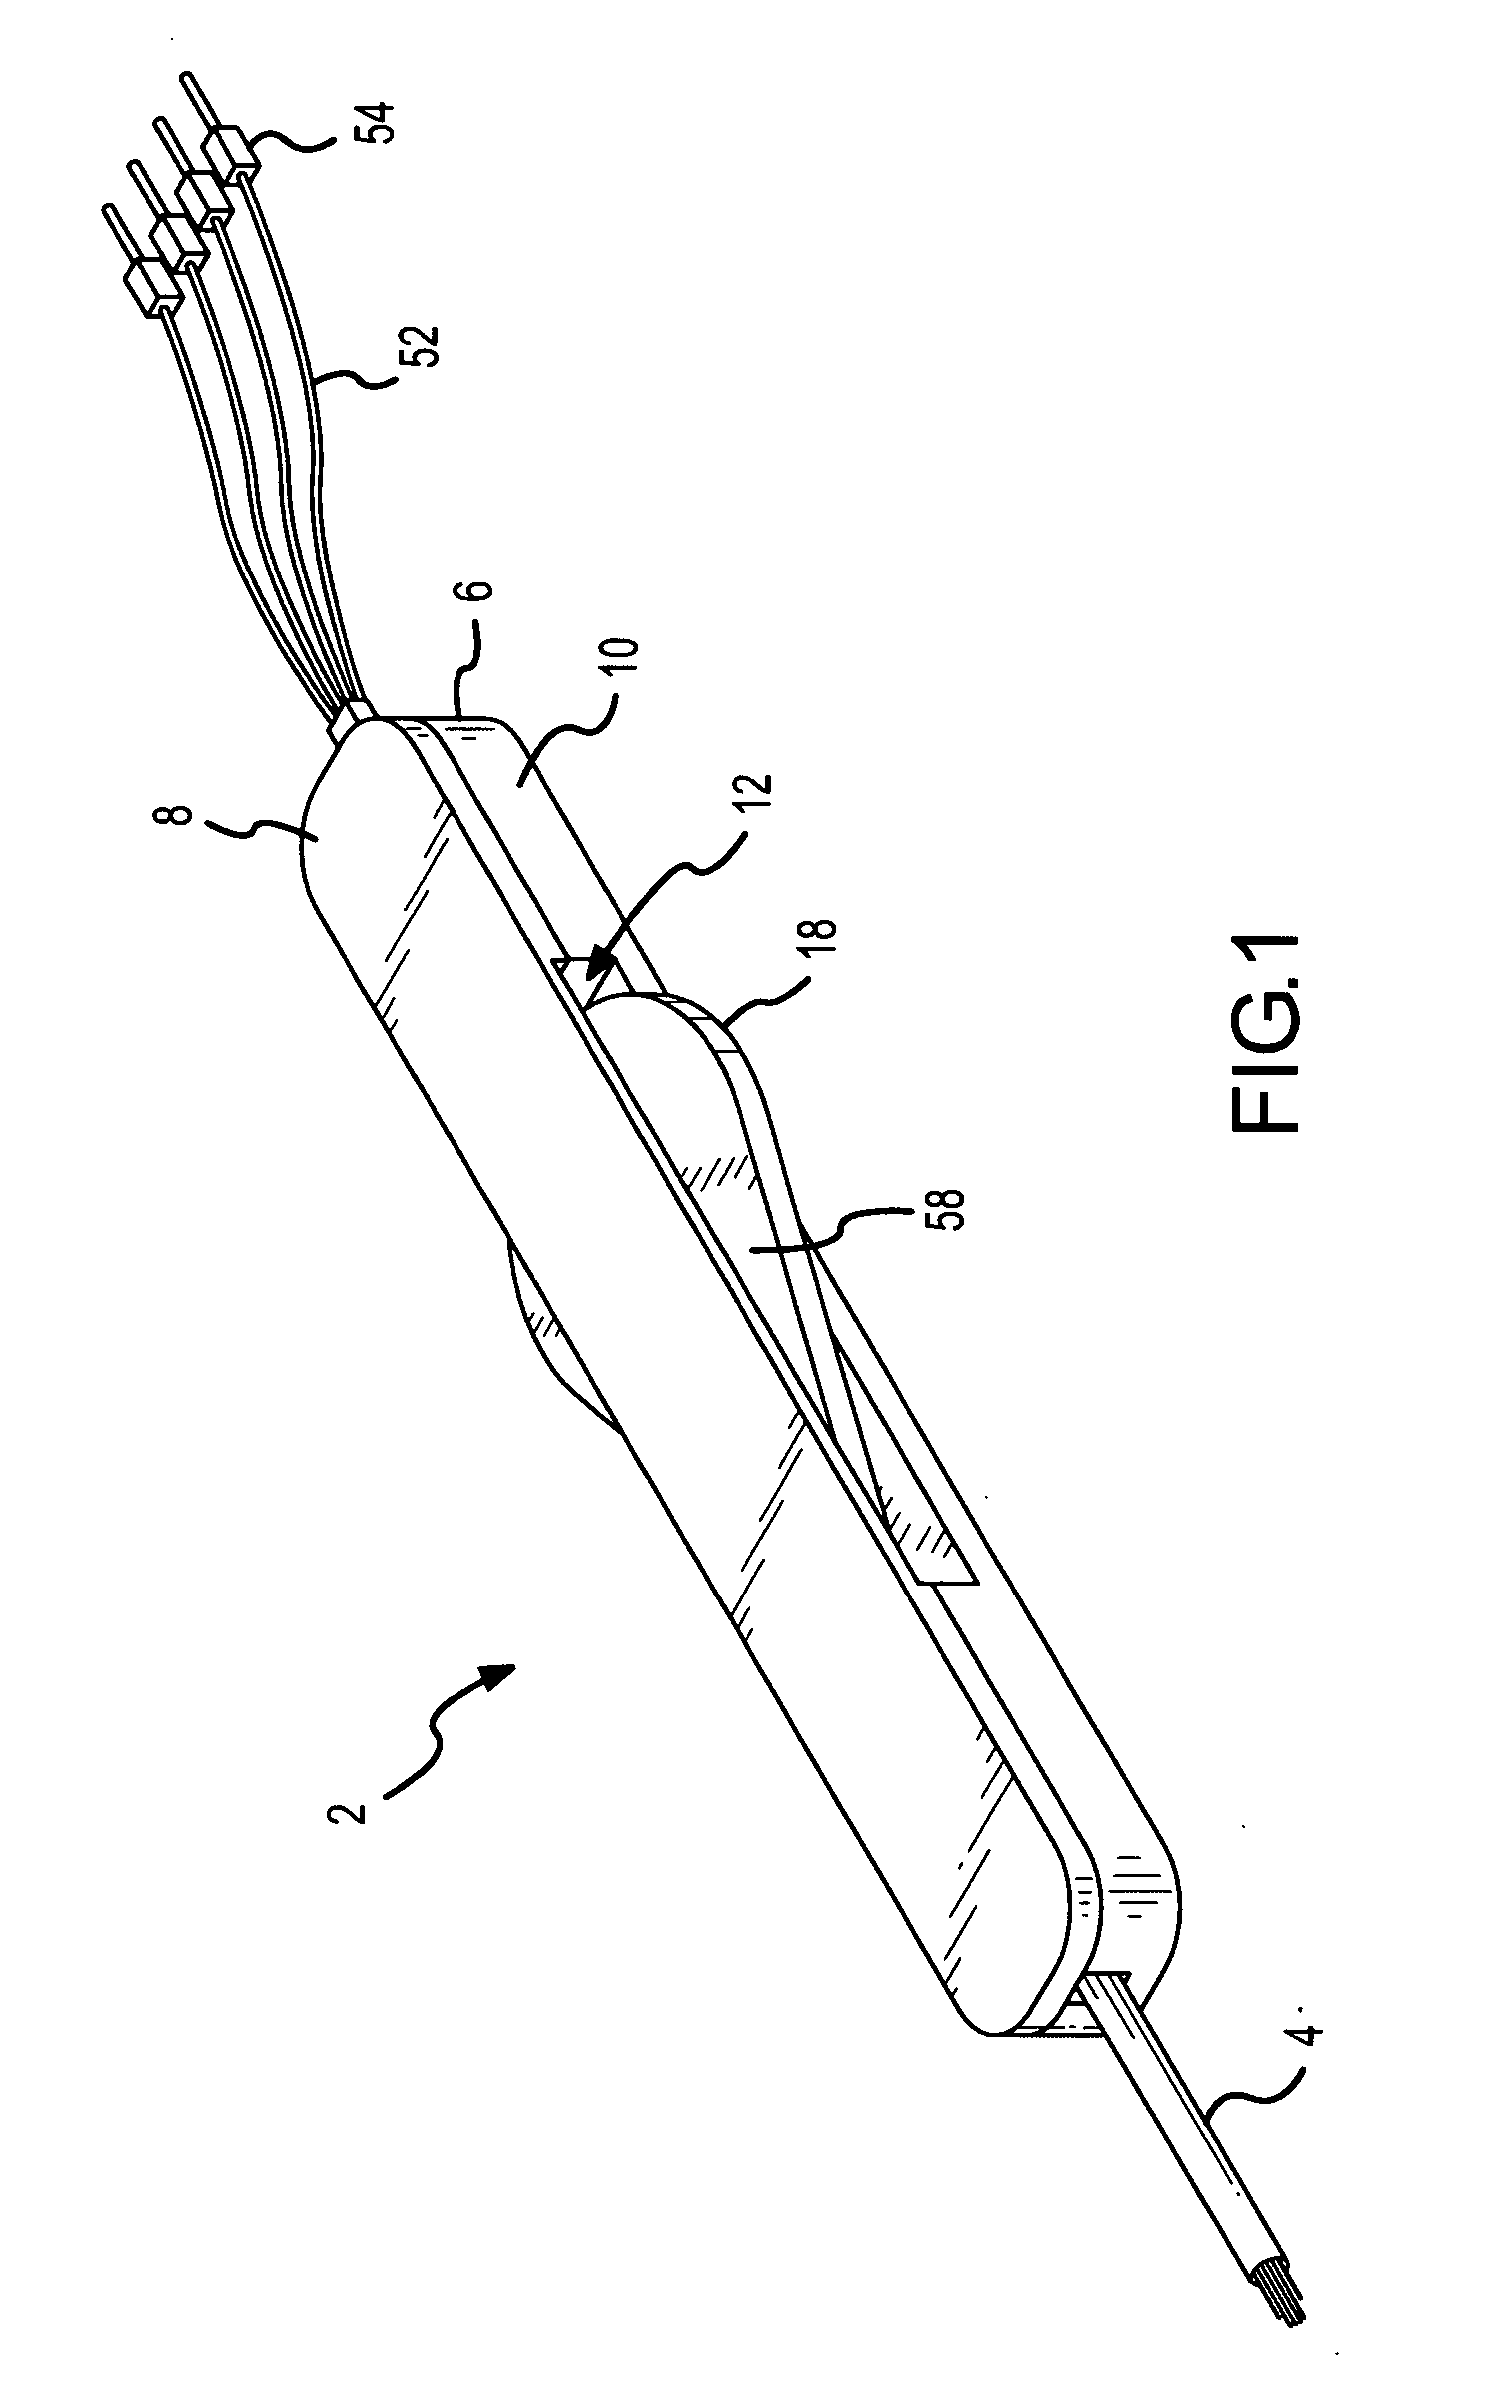 Steerable catheter with hydraulic or pneumatic actuator